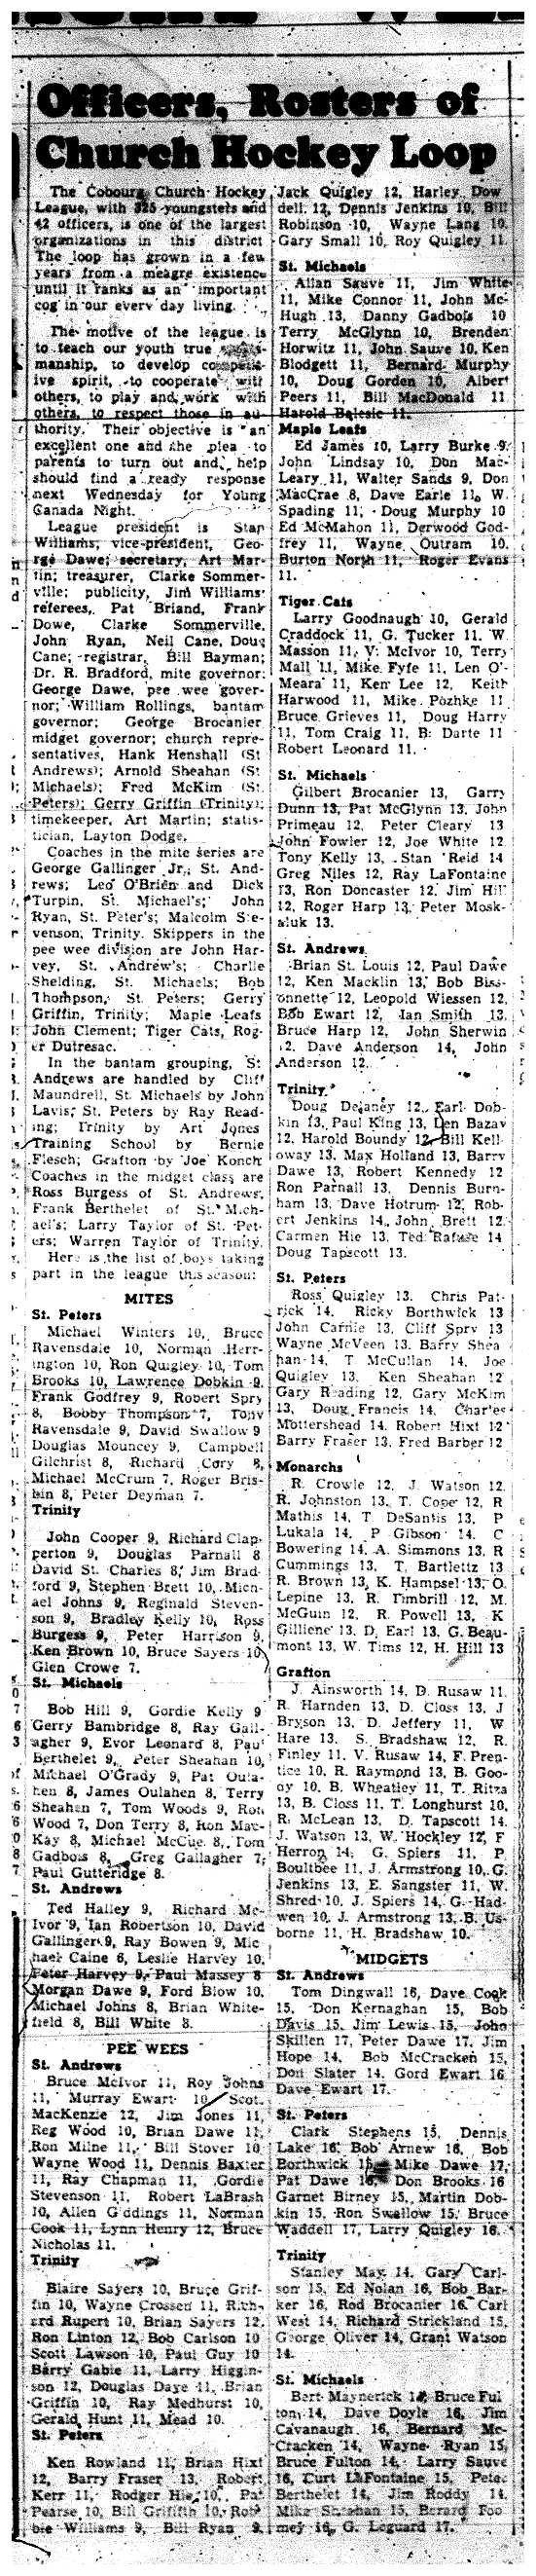 1958-01-30 Hockey -CCHL -names of players on each team